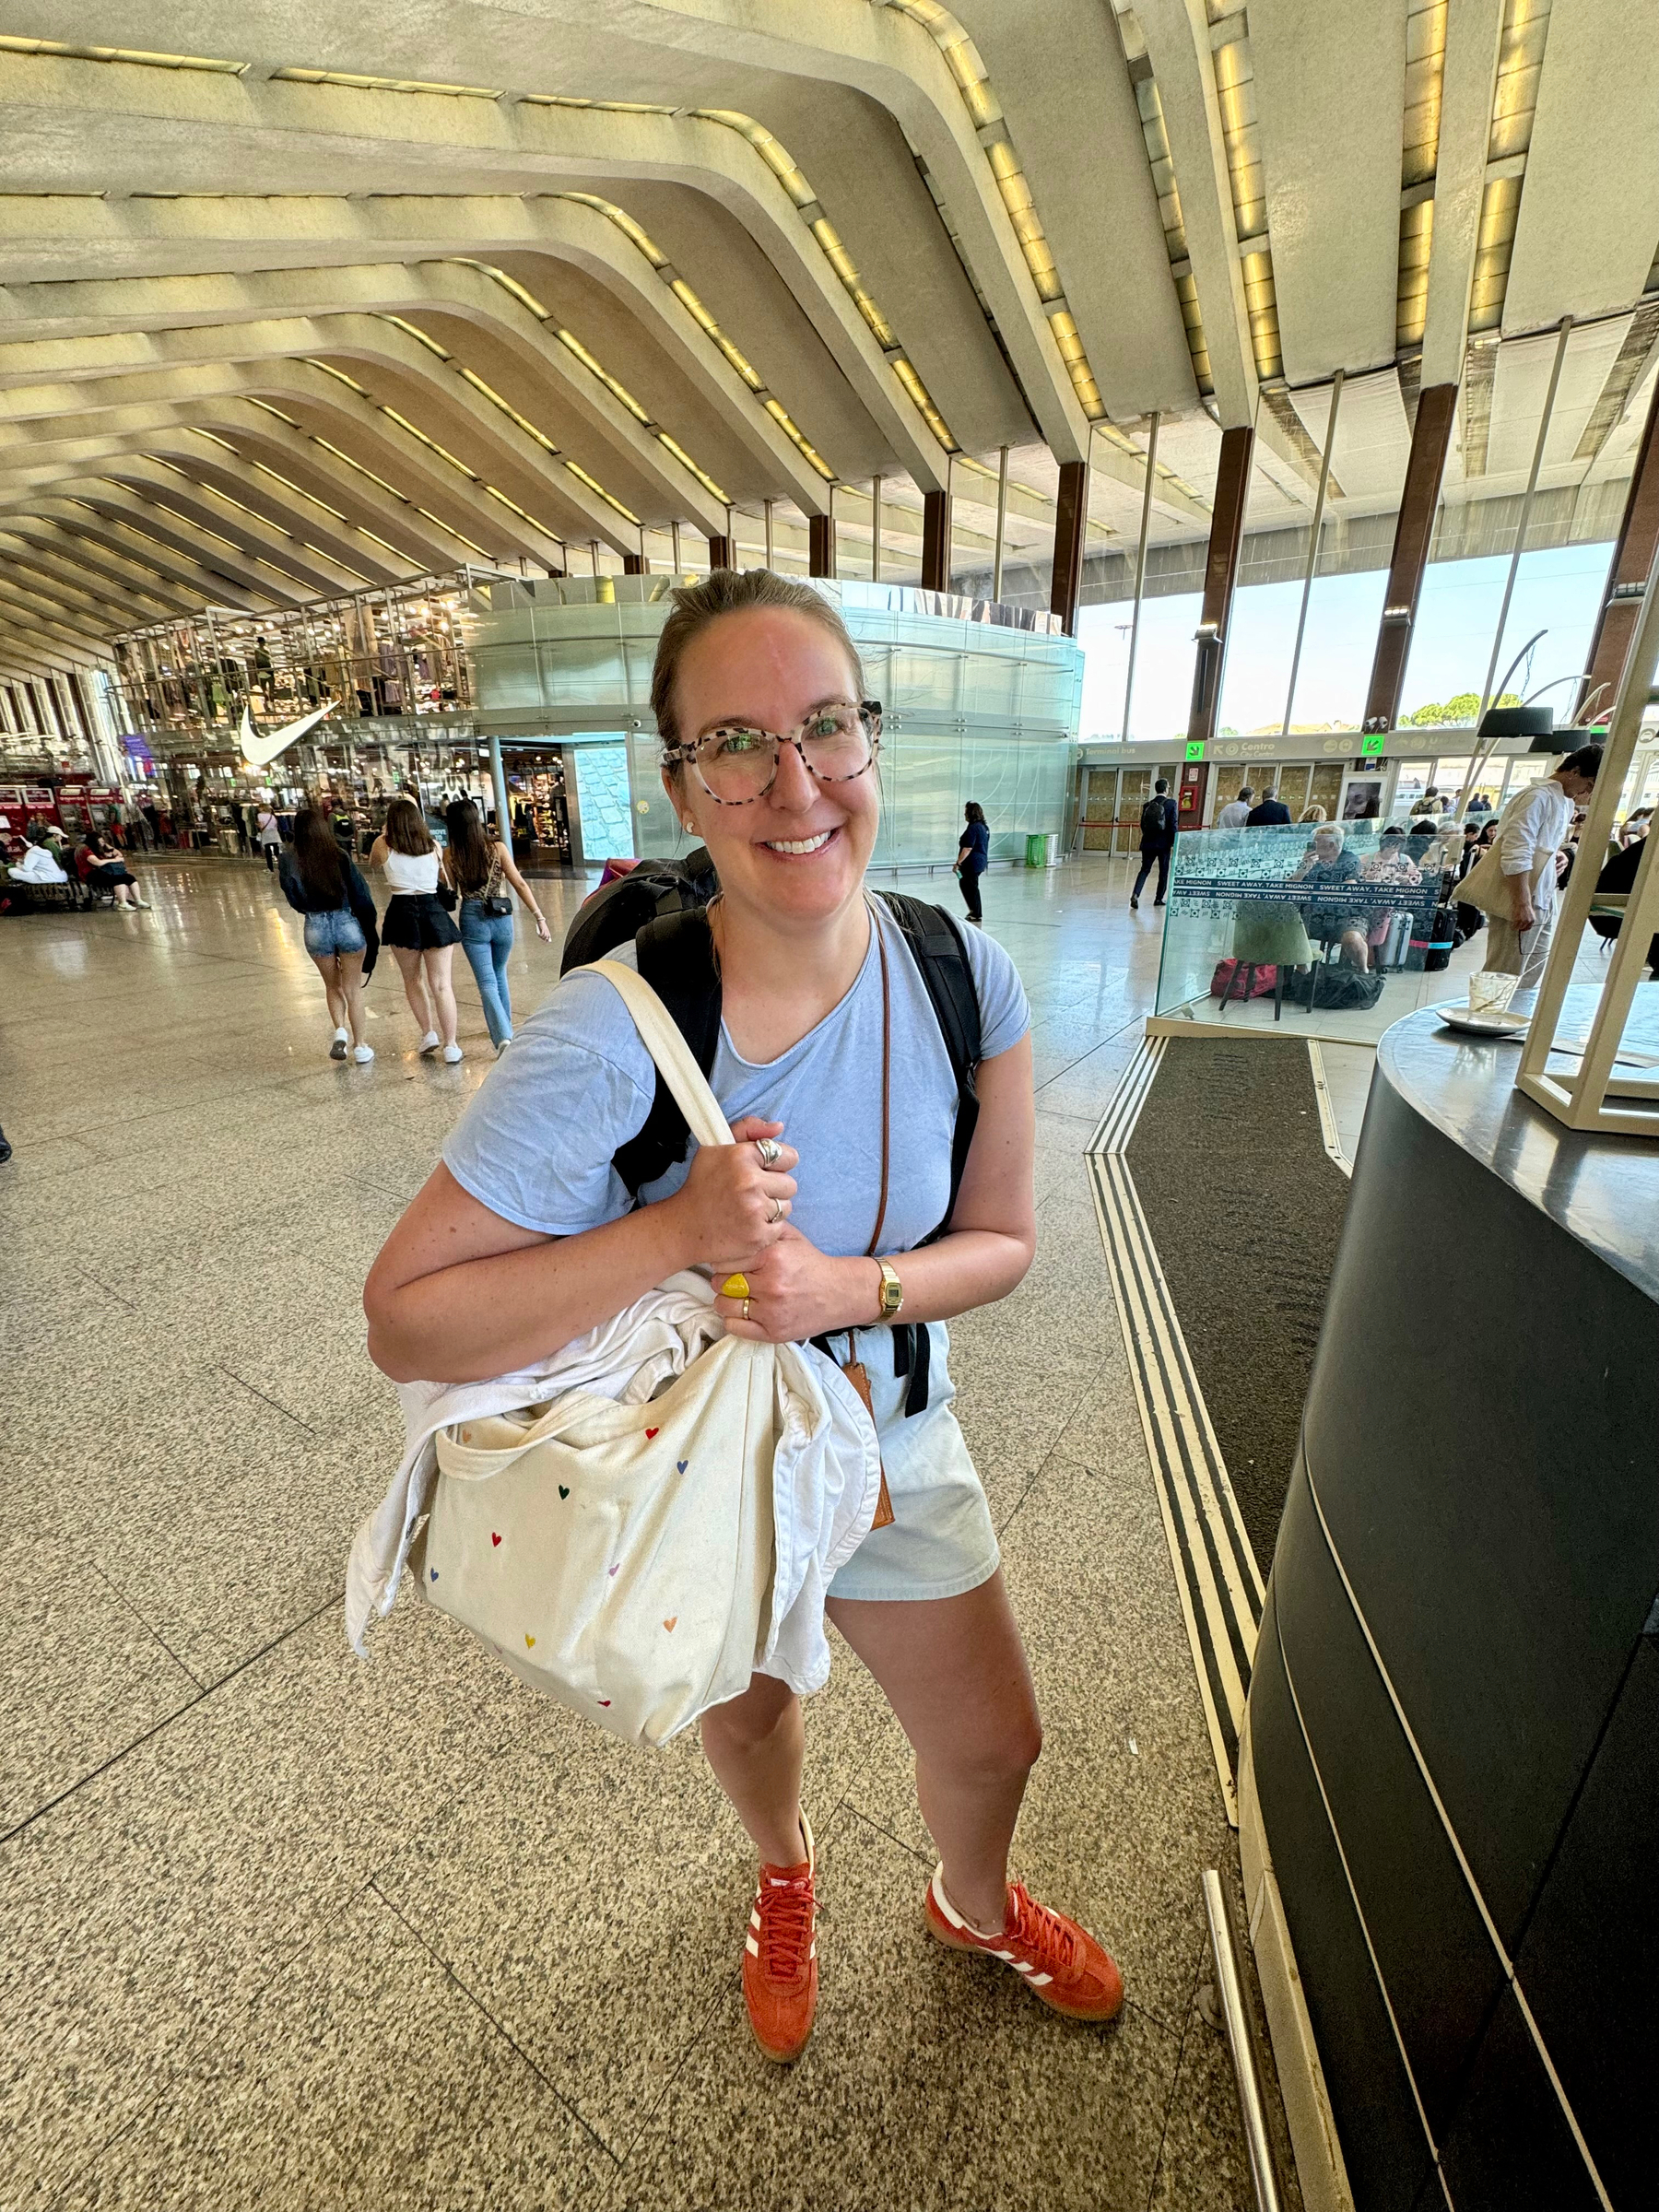 A woman is standing in a train terminal, smiling at the camera. She is holding a tote bag with small heart designs and wearing a light blue T-shirt, beige shorts, red sneakers, glasses, and a wristwatch.